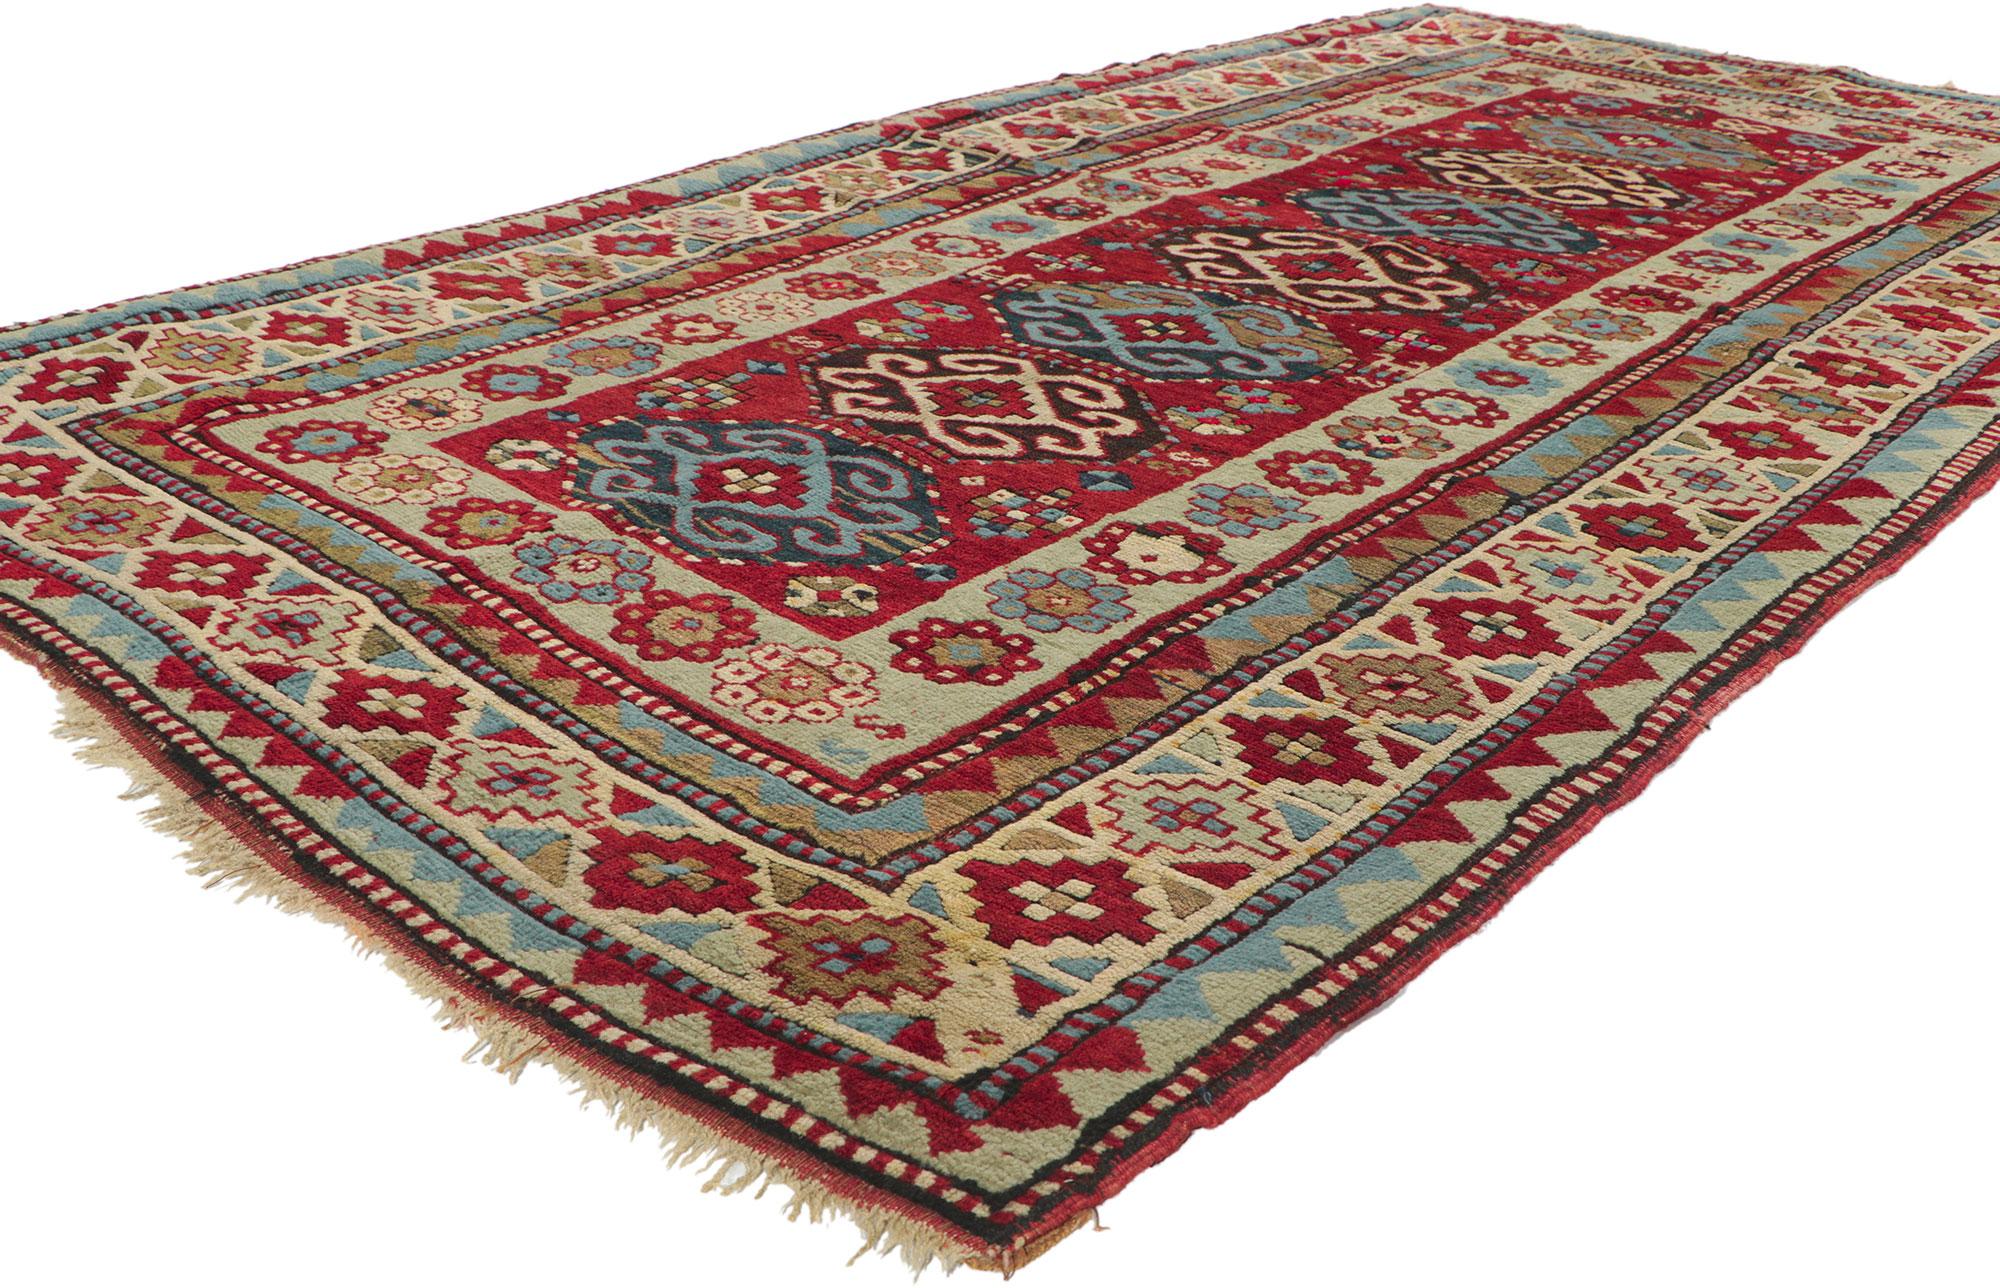 74292 Antique Russian Caucasian Kazak Rug, 04'04 X 08'06.
Based on traditional designs from the Caucasus region, this hand knotted wool antique Caucasian Kazak Rug features seven octagon medallions, each filled with ram's Horn motifs and stair-step